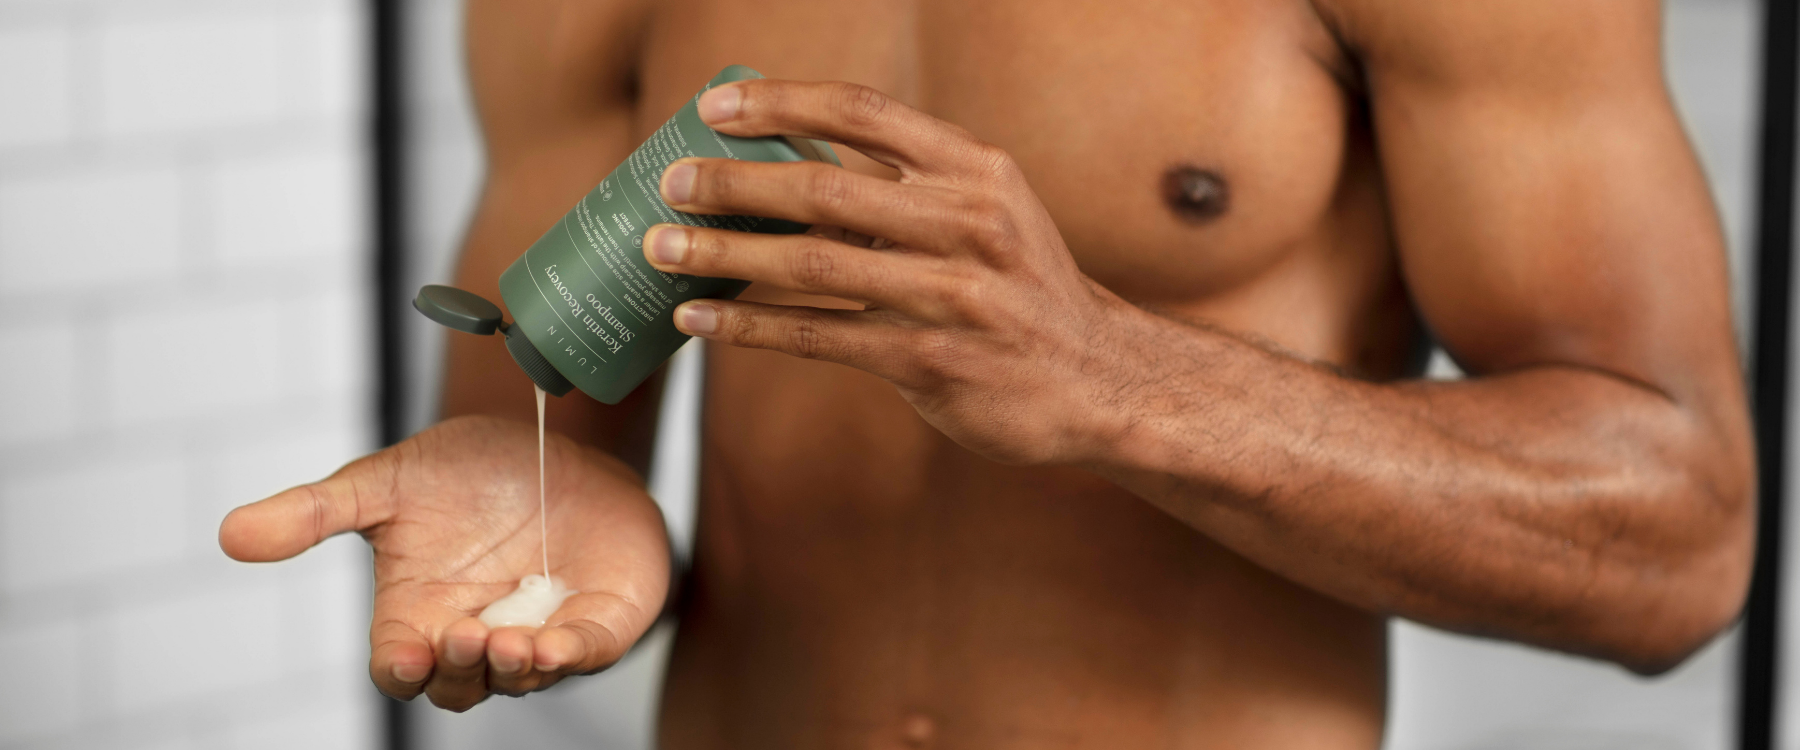 naked men pouring Lumin shower gel in his hand